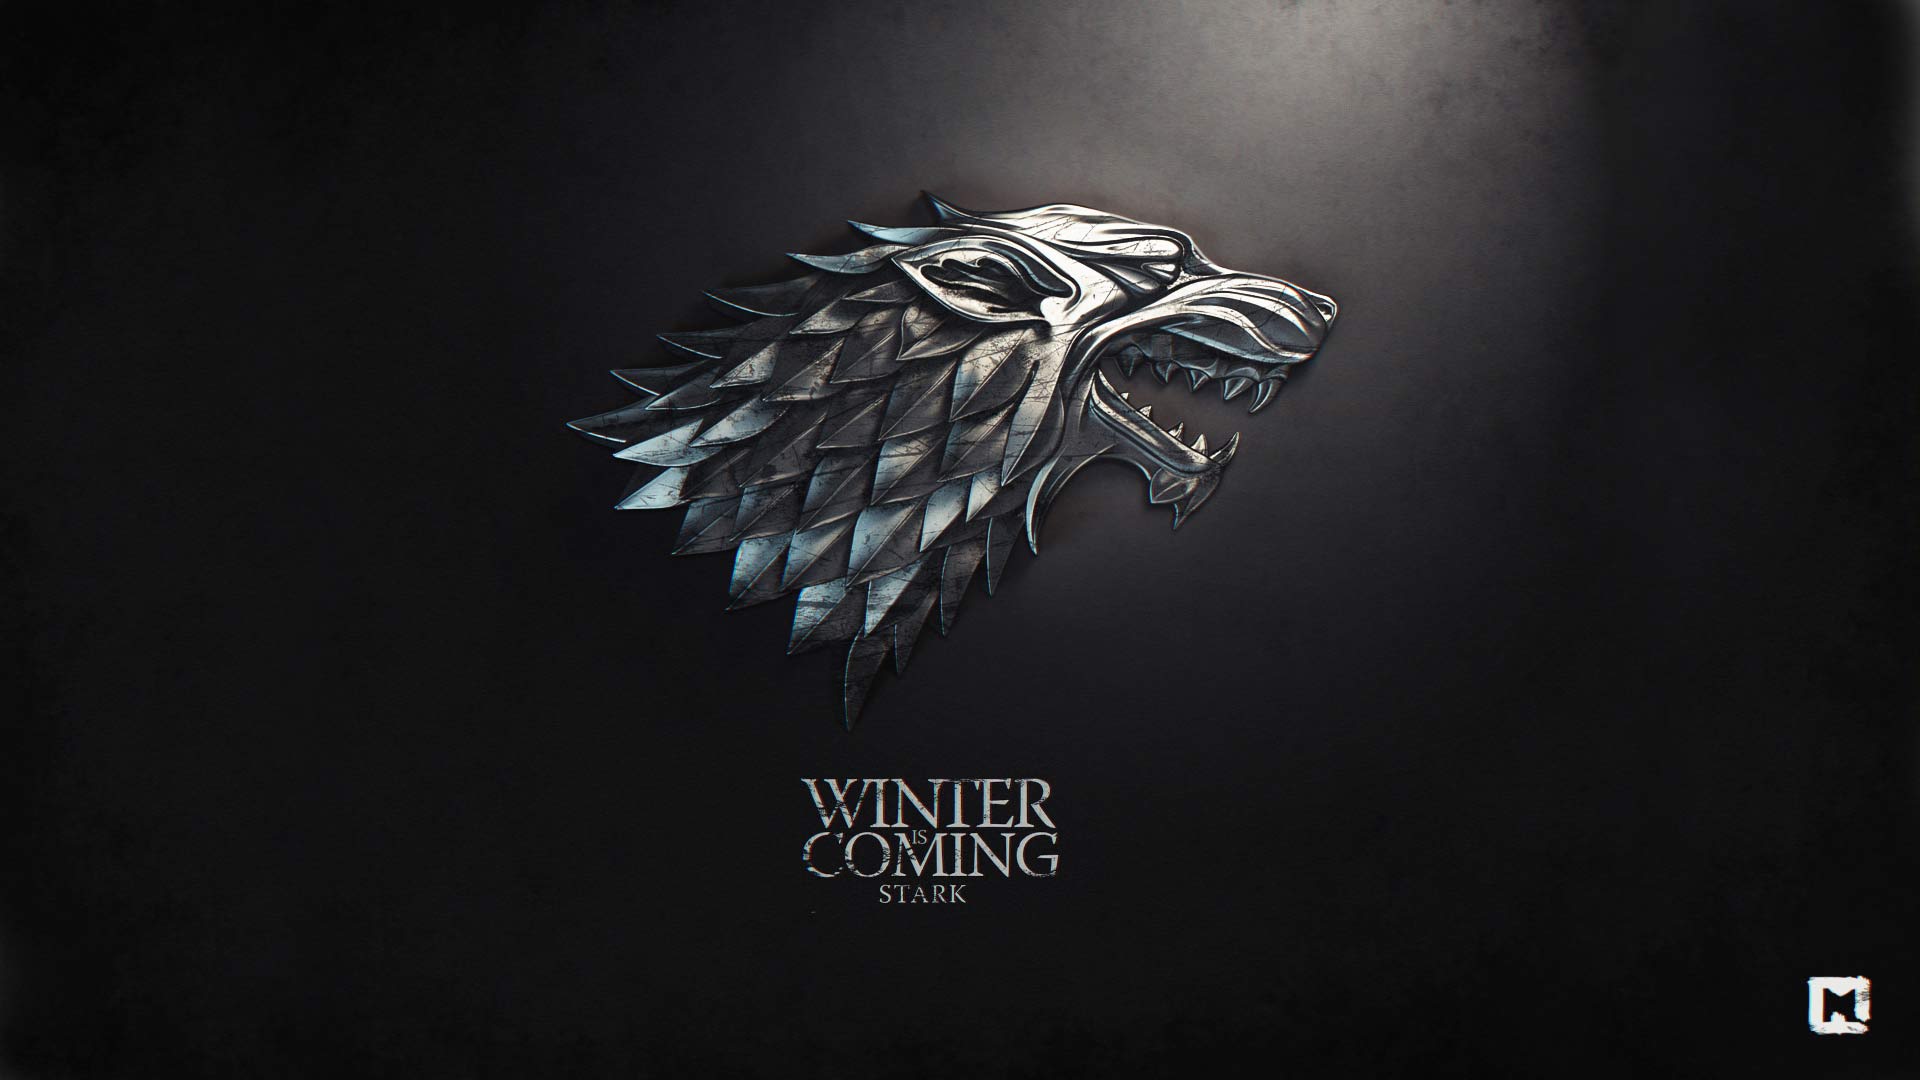 Game of Thrones Wallpapers & Backgrounds | Game of Thrones Wallpapers